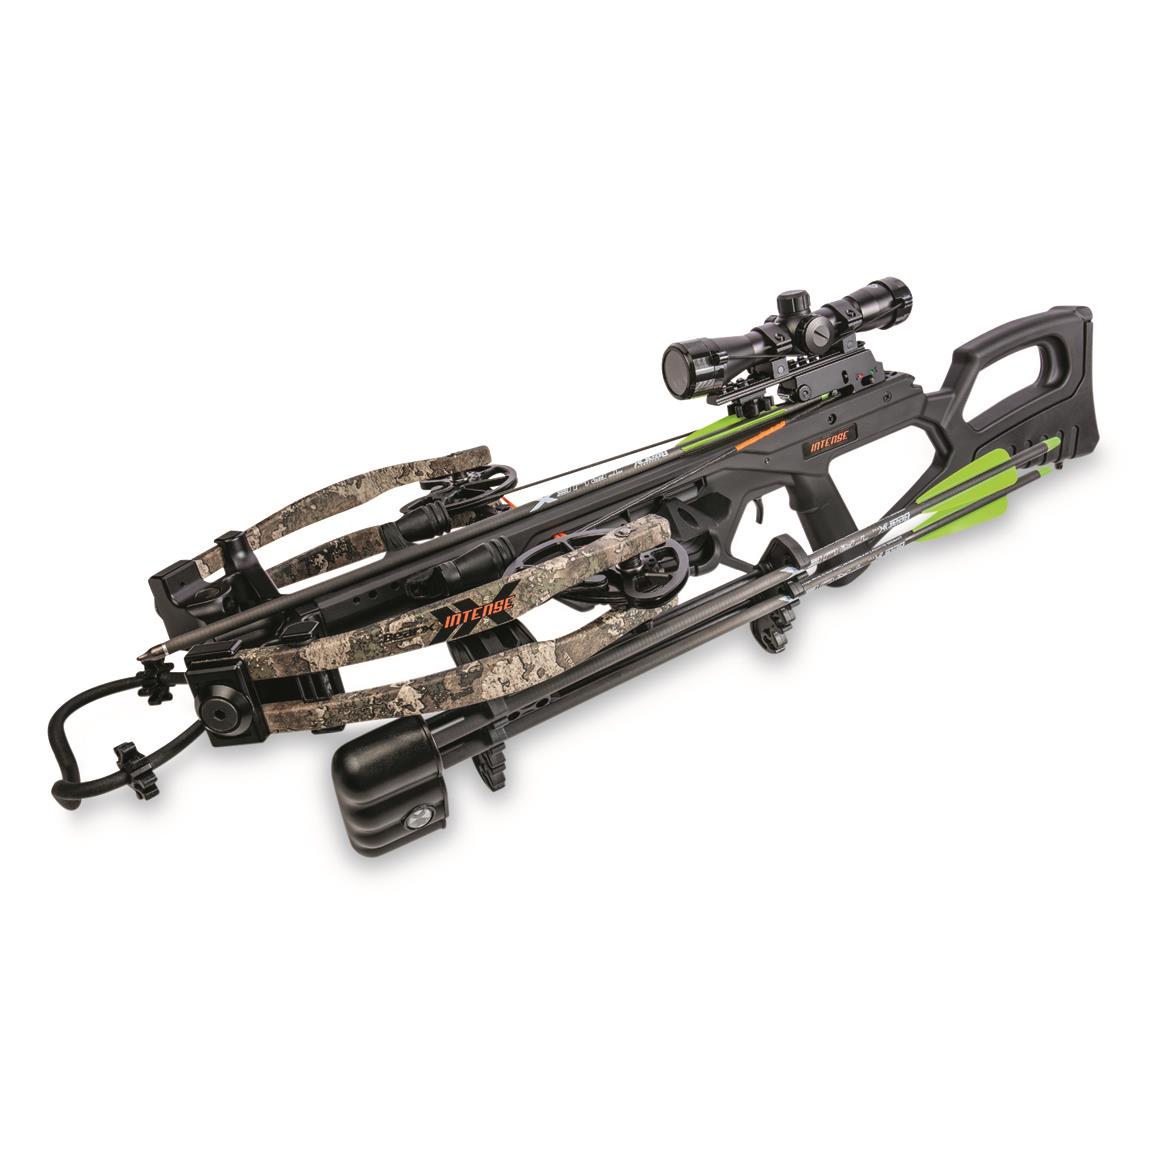 BearX Intense Ready-to-Hunt Crossbow Package, True Timber Strata